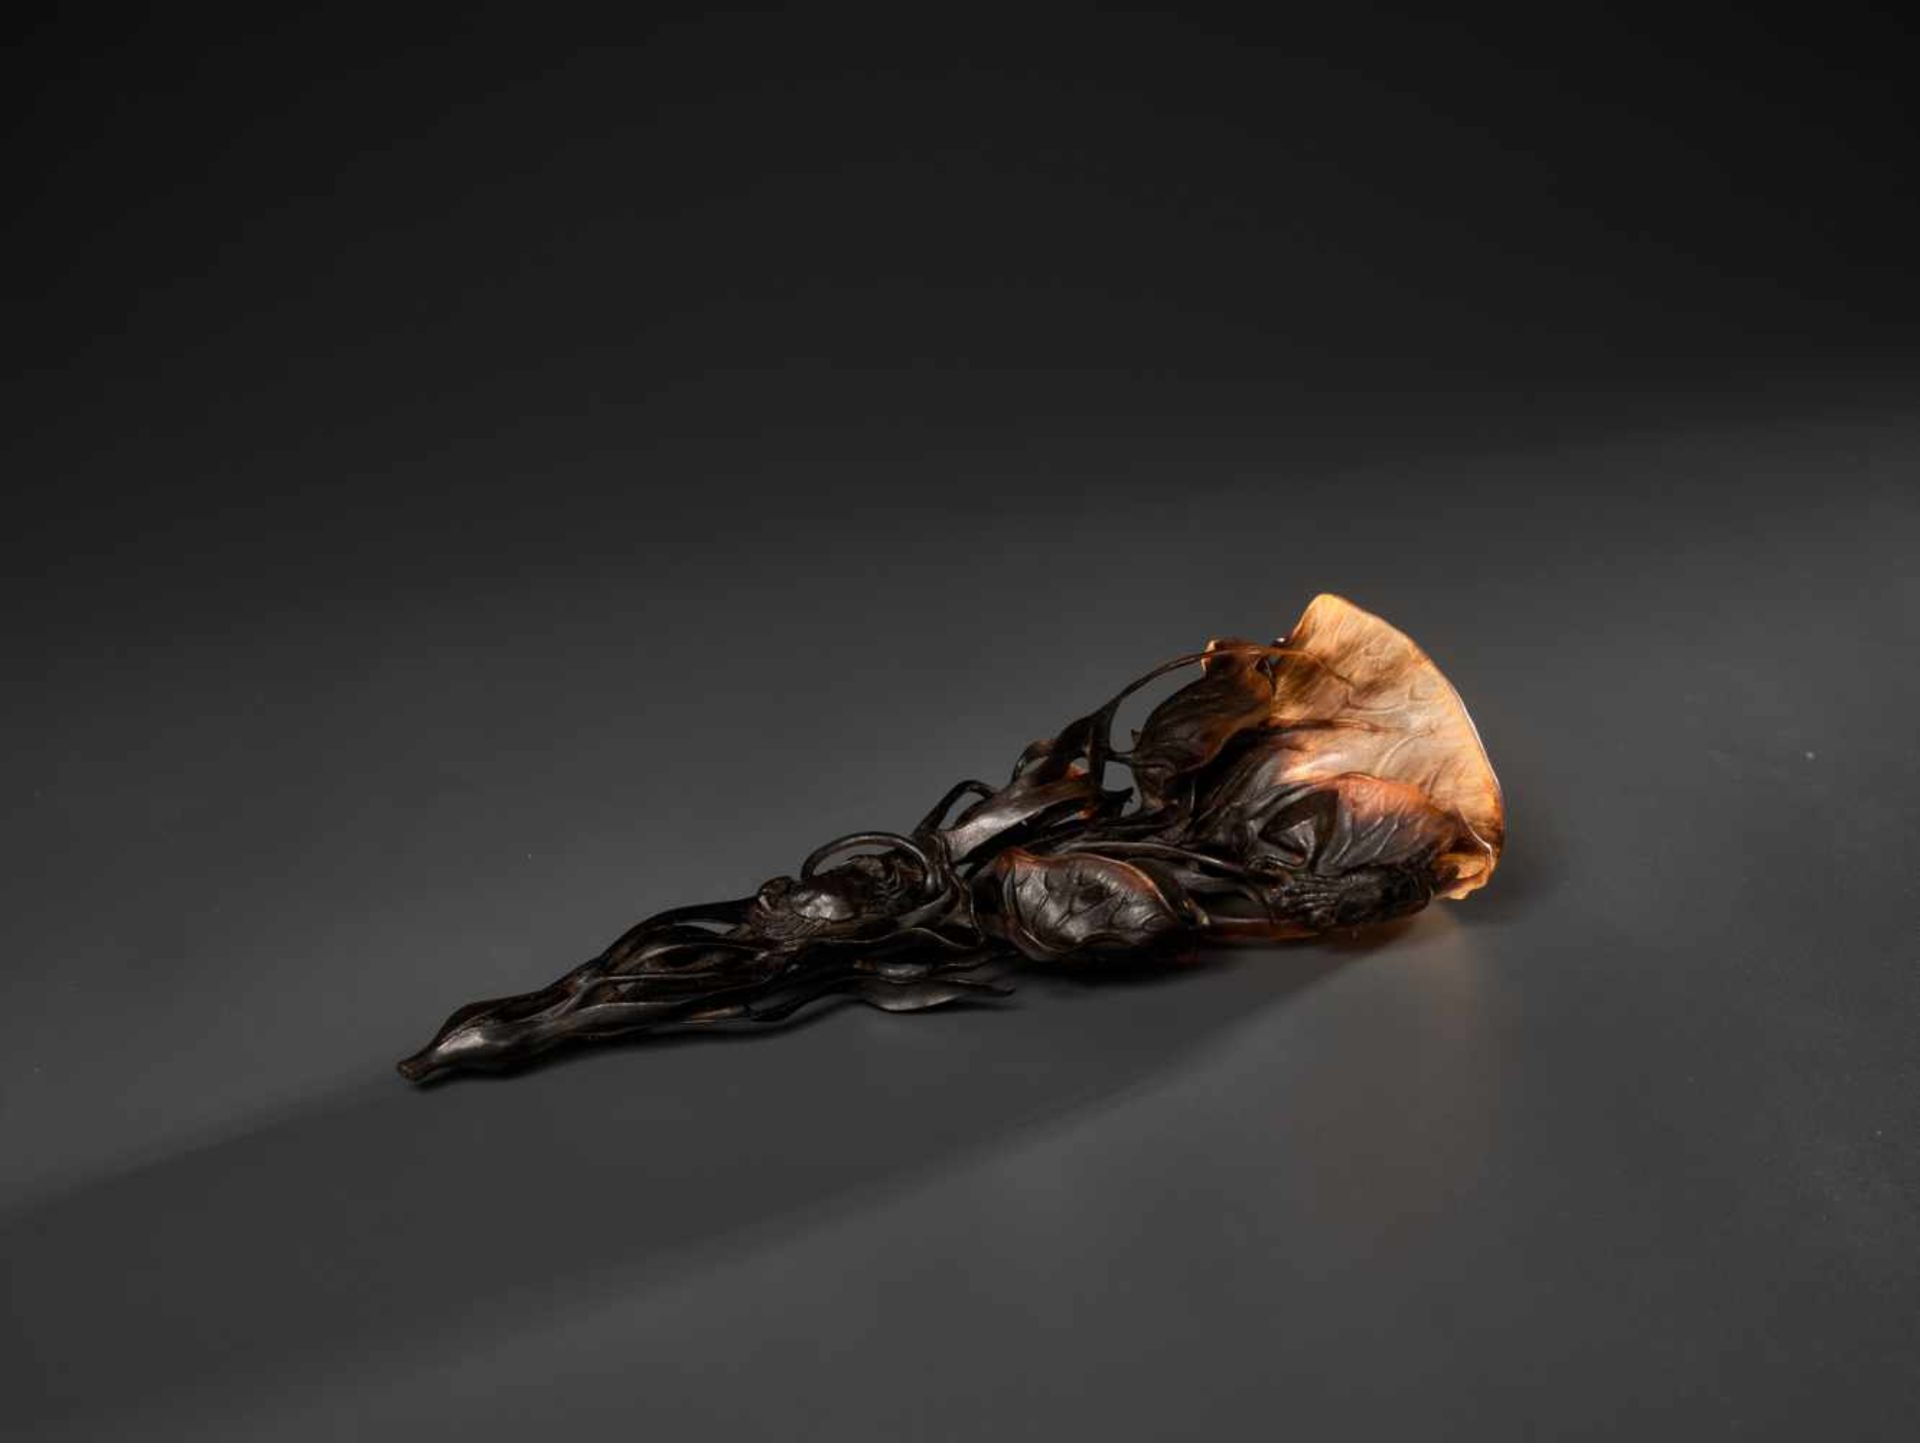 AN 18TH CENTURY RETICULATED FULL TIP RHINOCEROS ‘LOTUS’ CUP Rhinoceros horn in a deep brown to light - Image 2 of 9